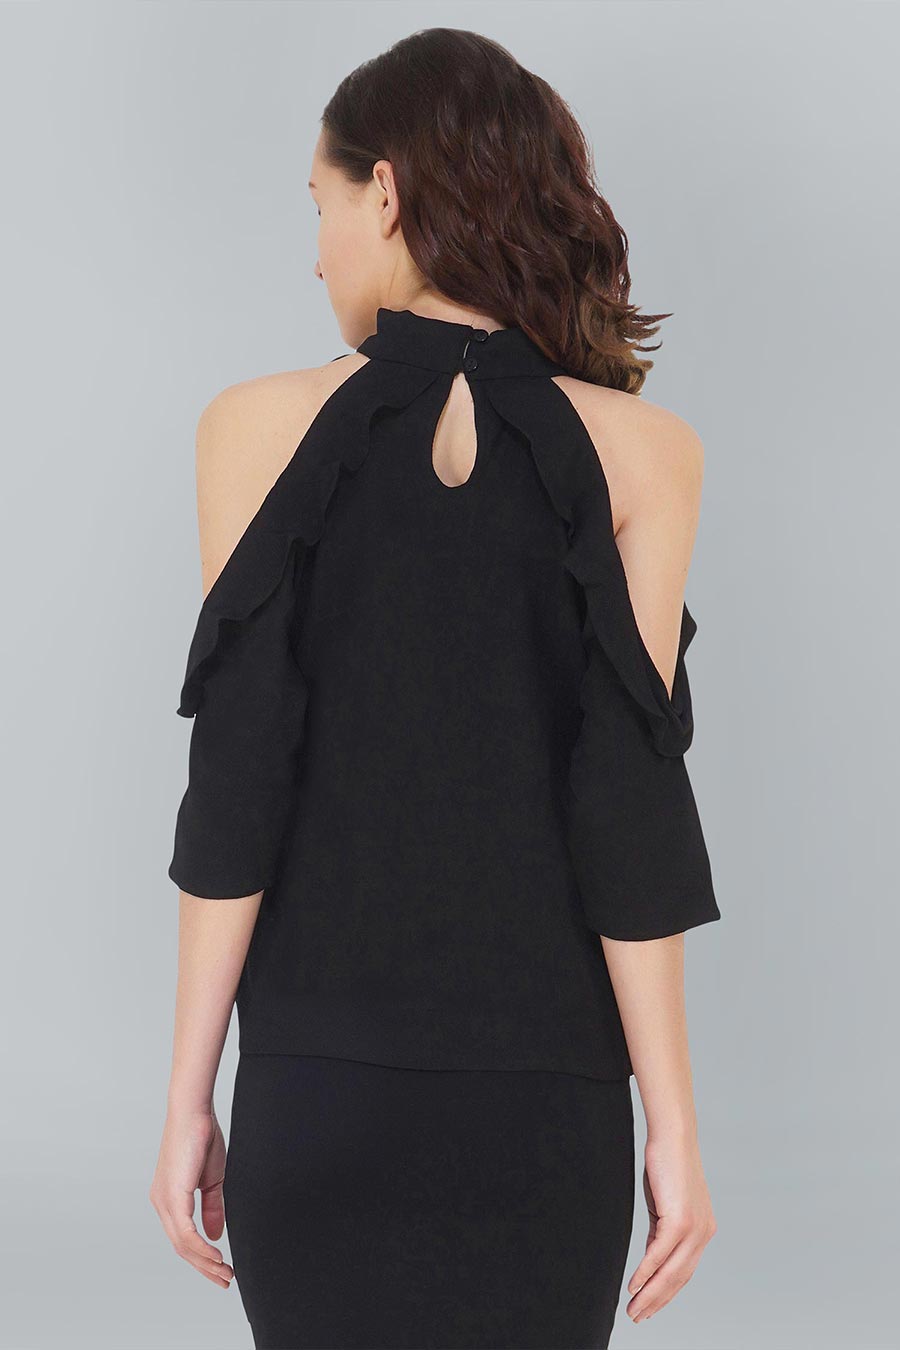 Cold Sleeve Black Top